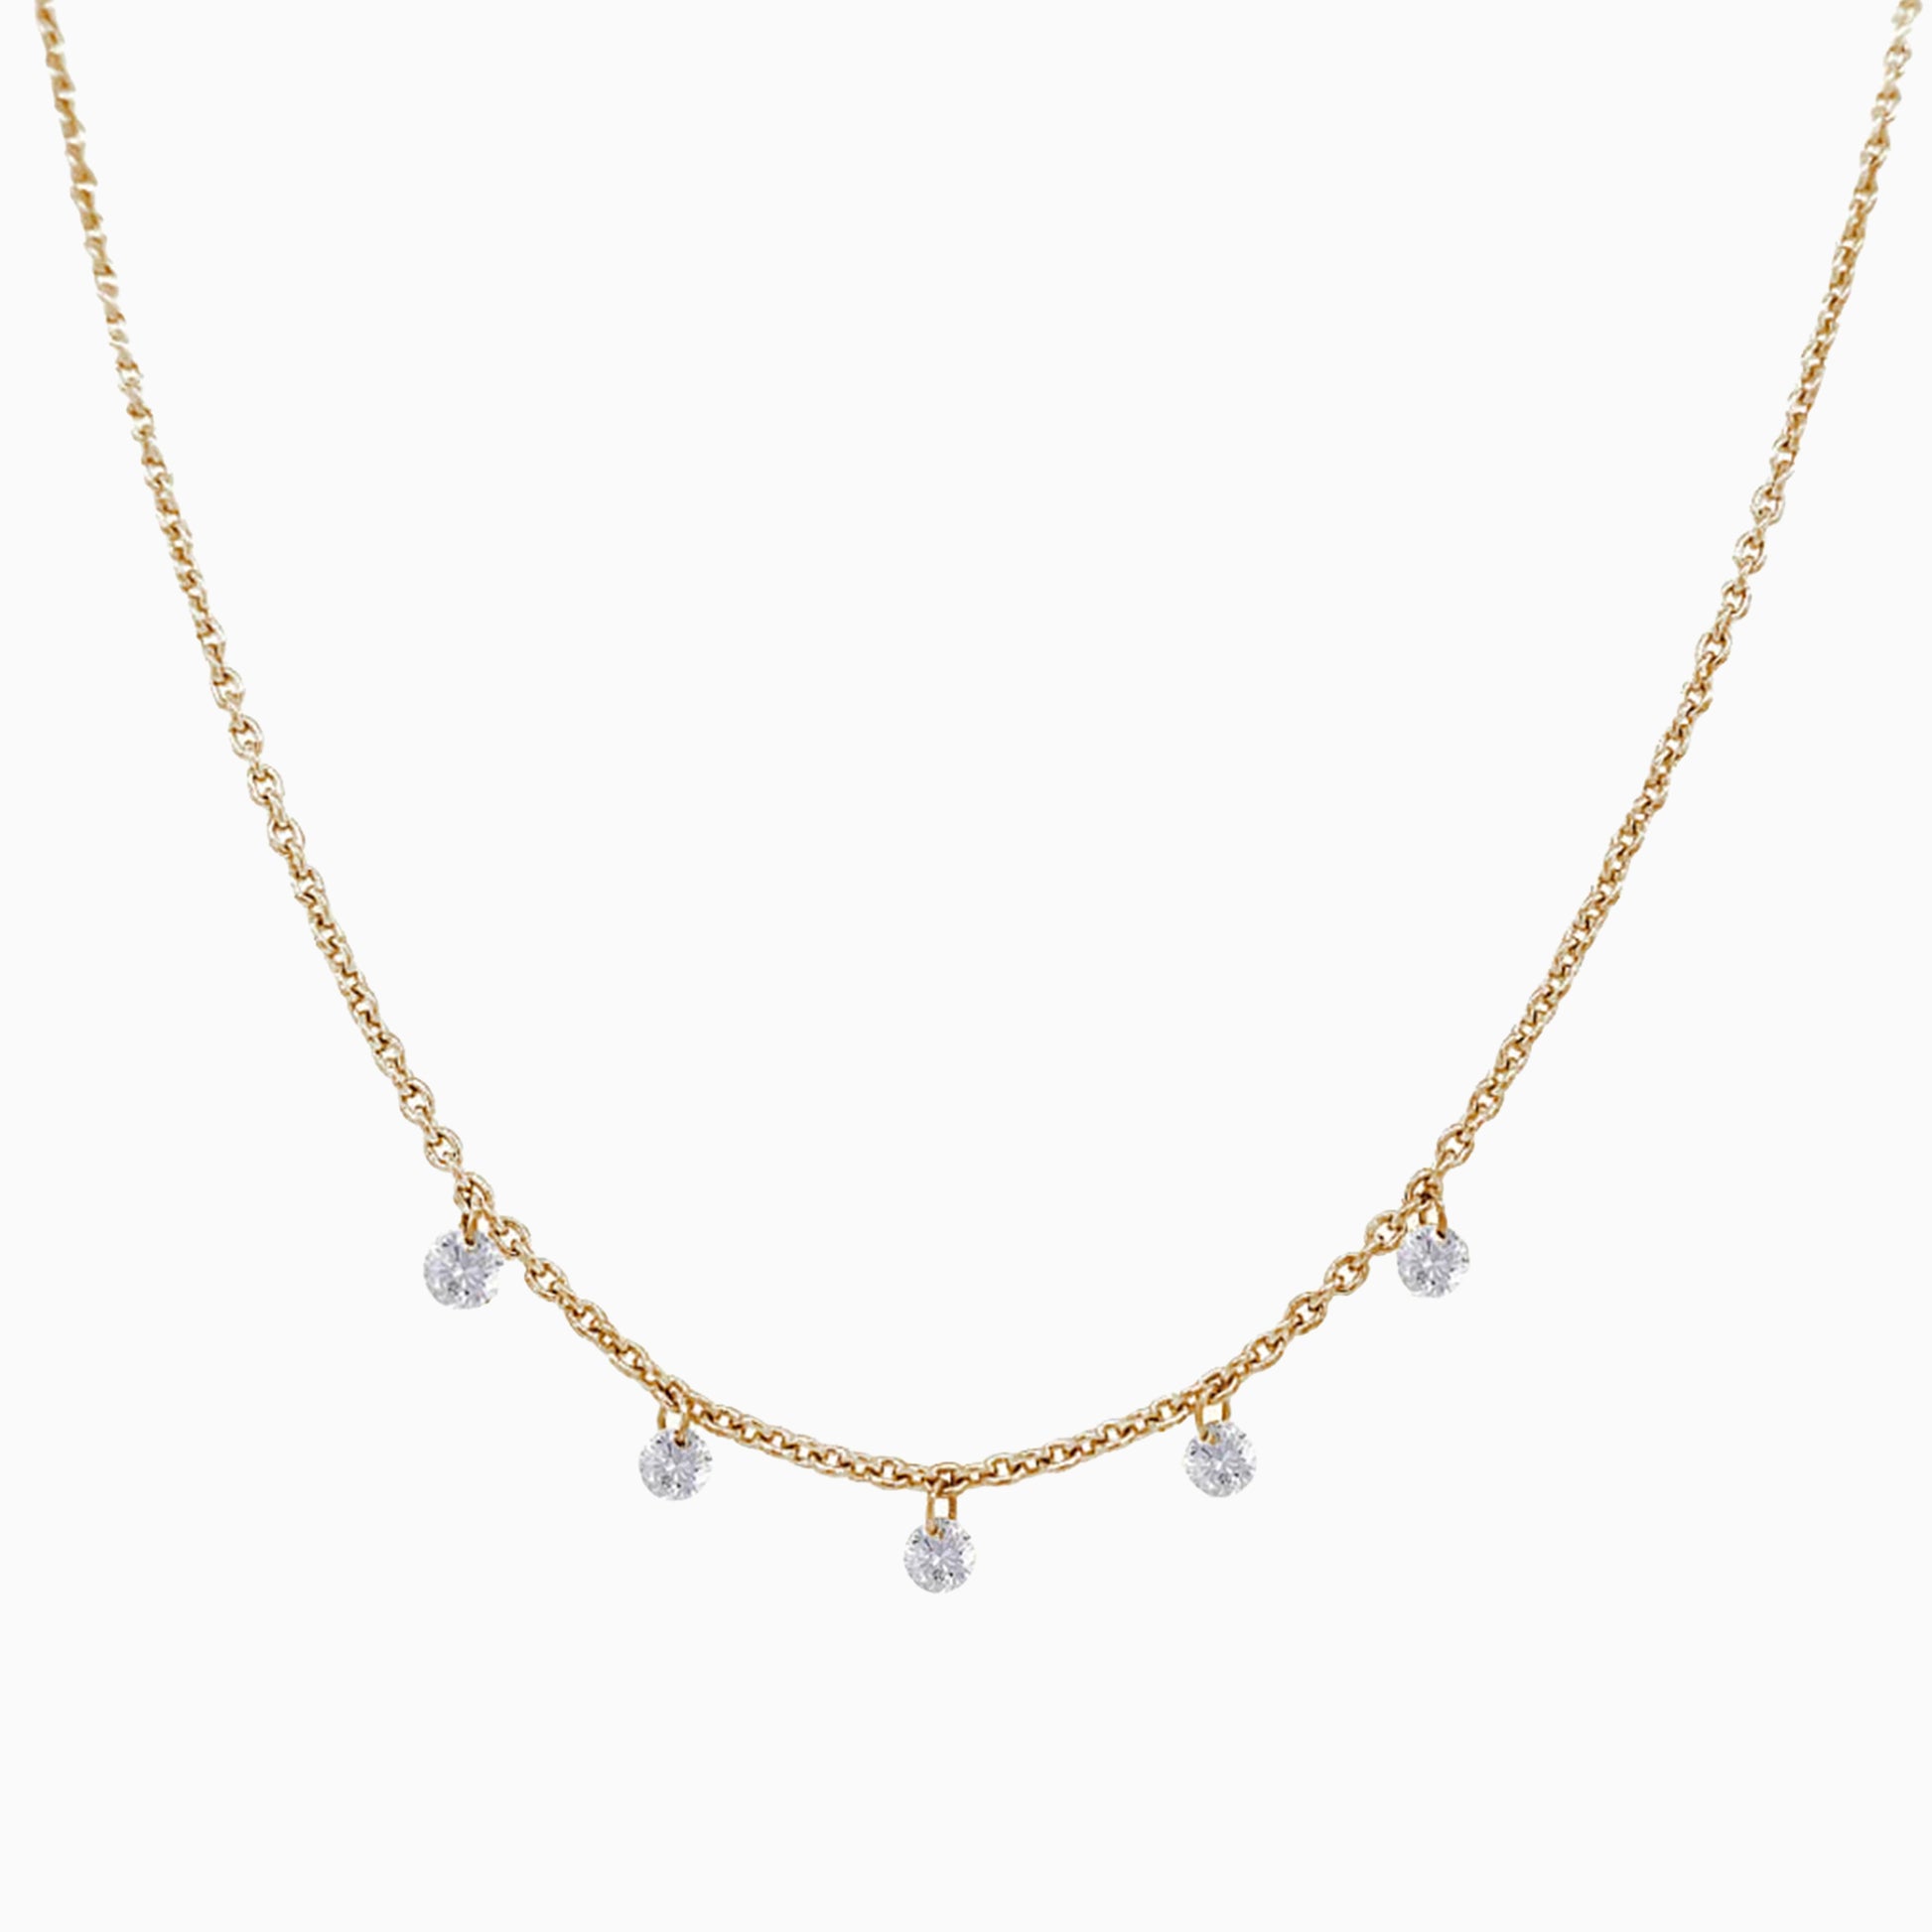 Floating Five Diamond Necklace in Yellow Gold on a white background